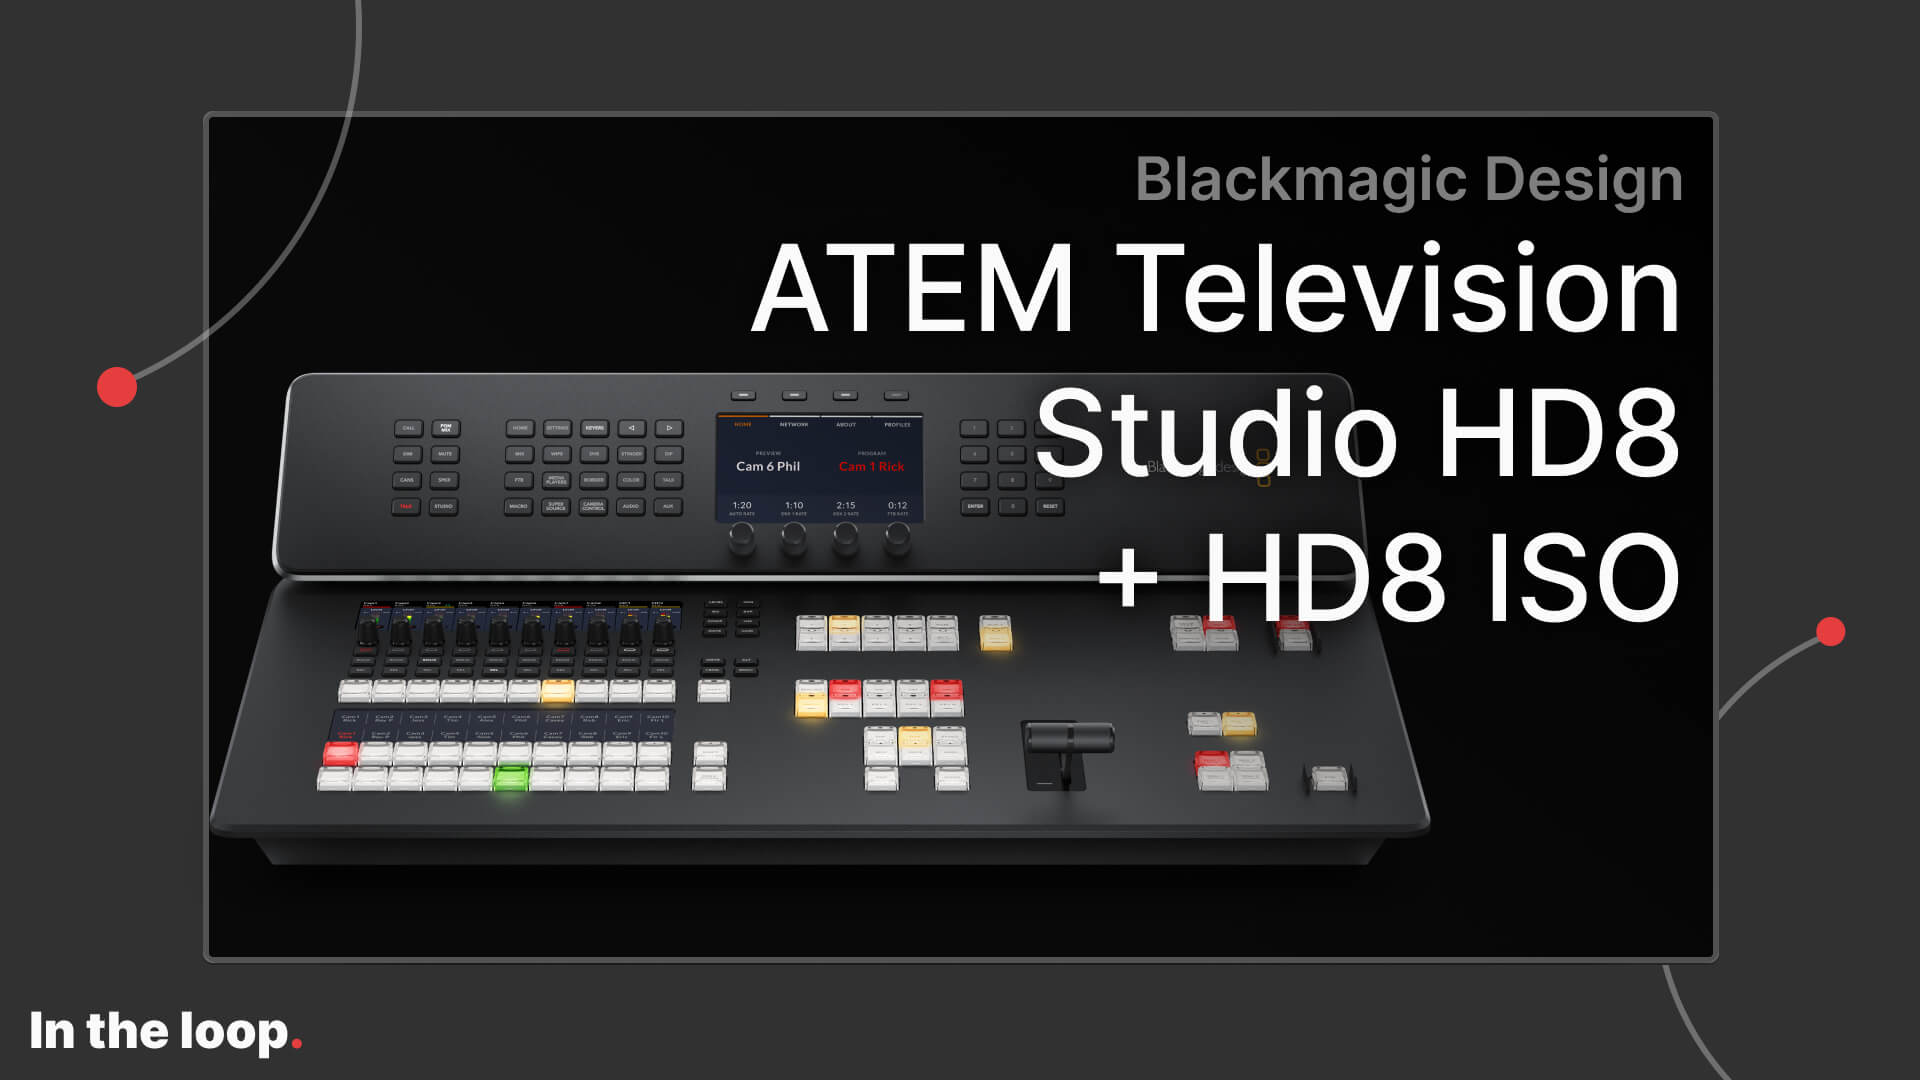 ATEM Television Studio HD8 and HD8 ISO // In the loop